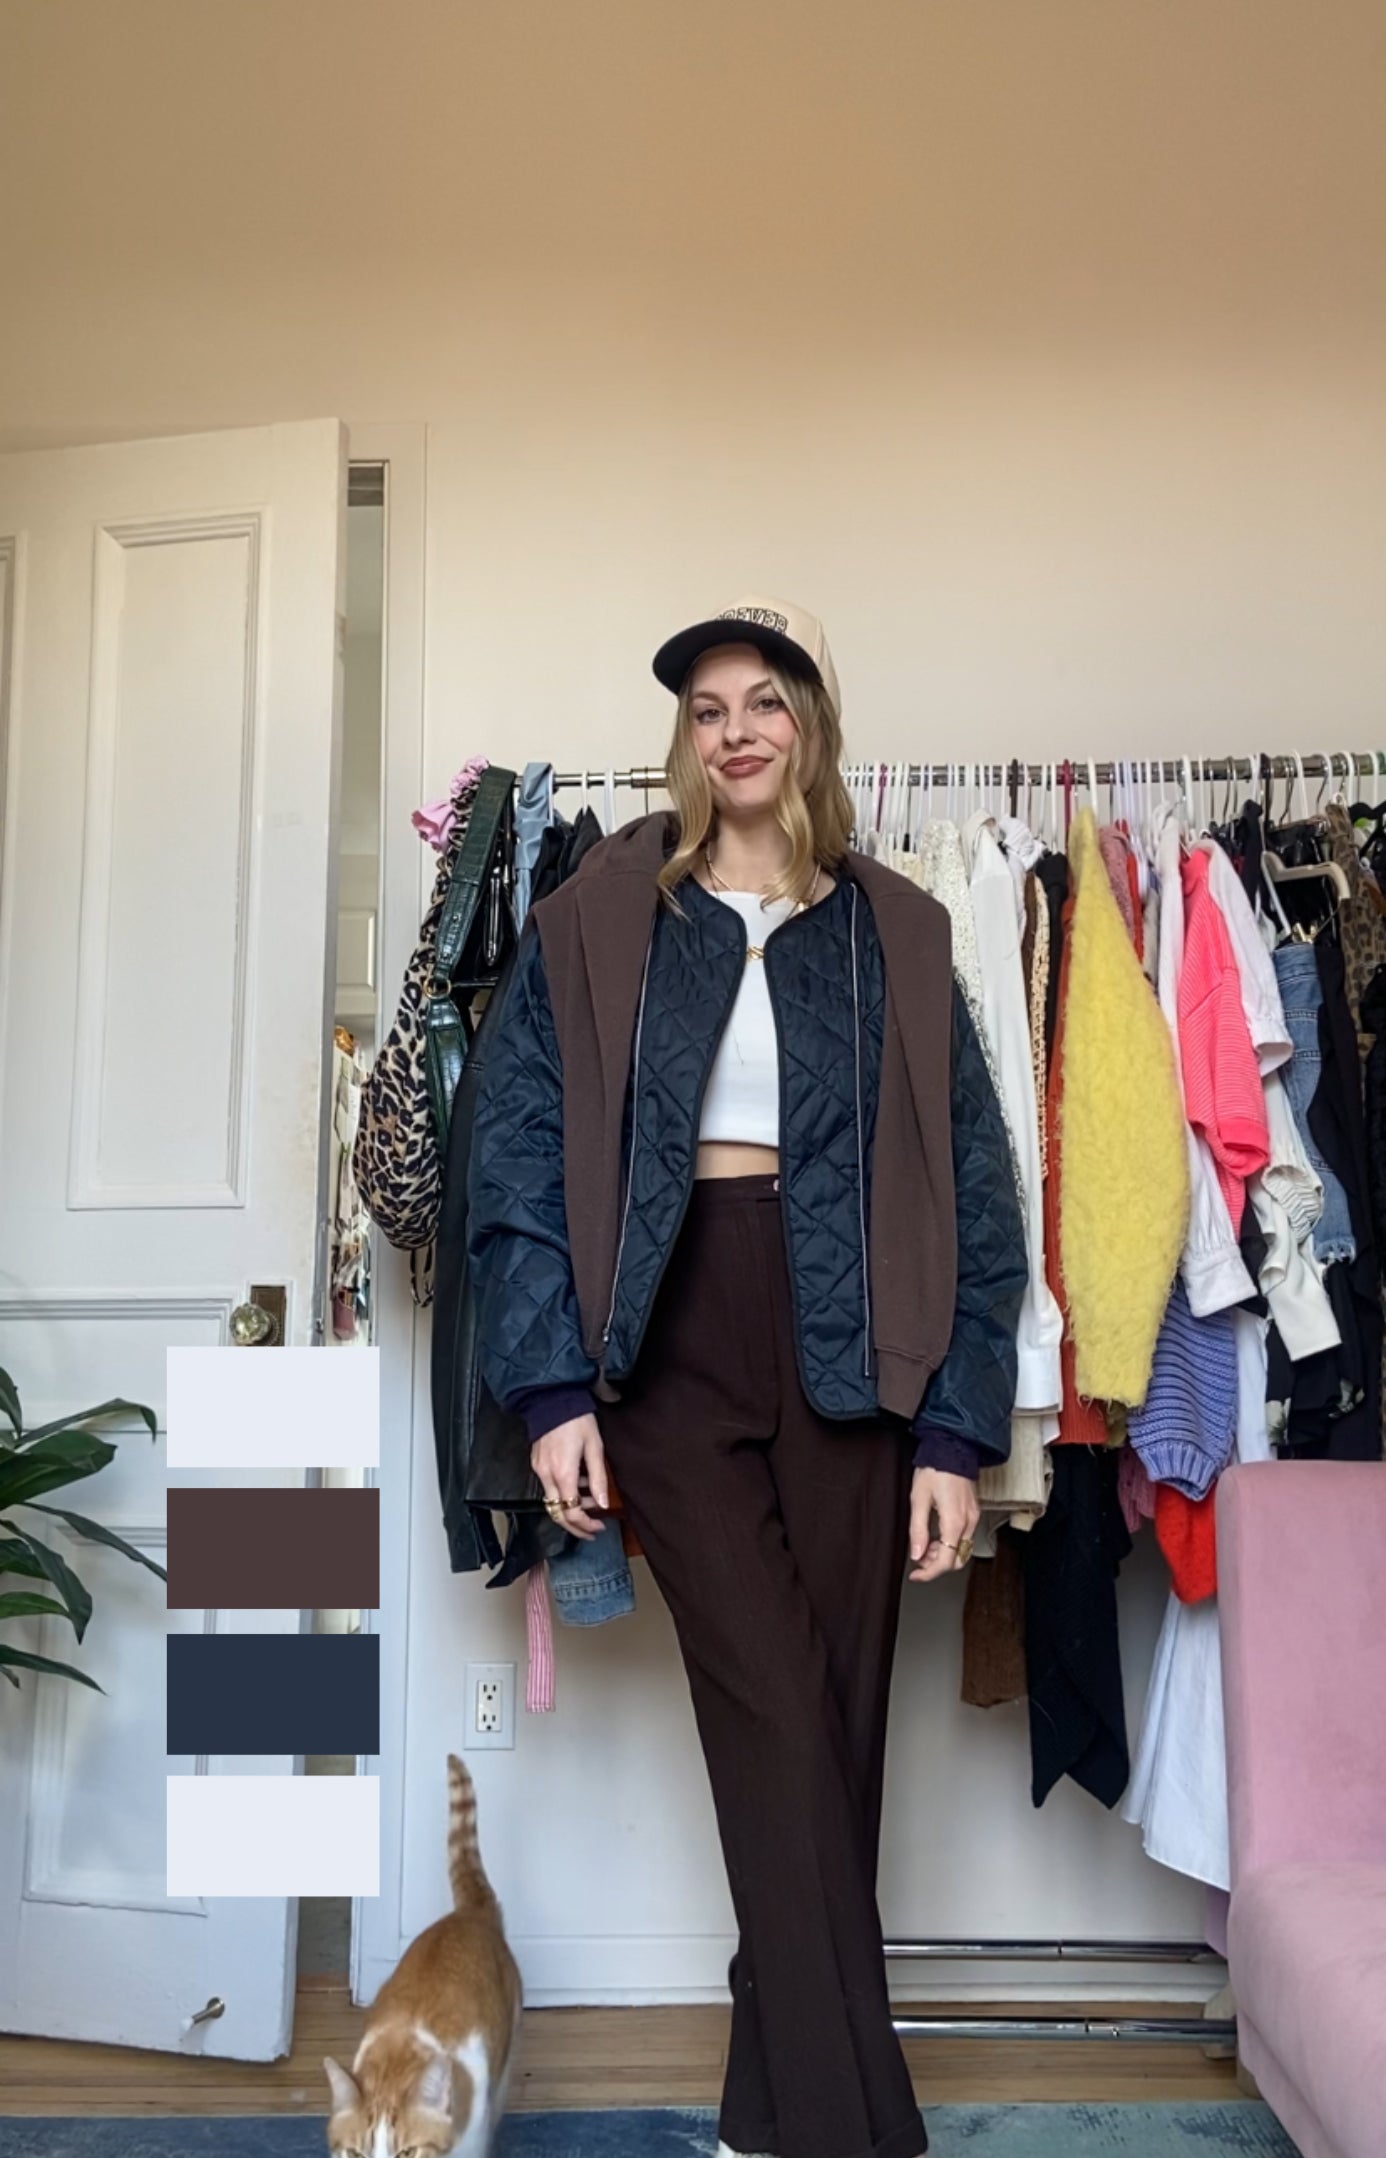 Person in a layered outfit with a cap stands in a room with clothes rack and a cat walking by